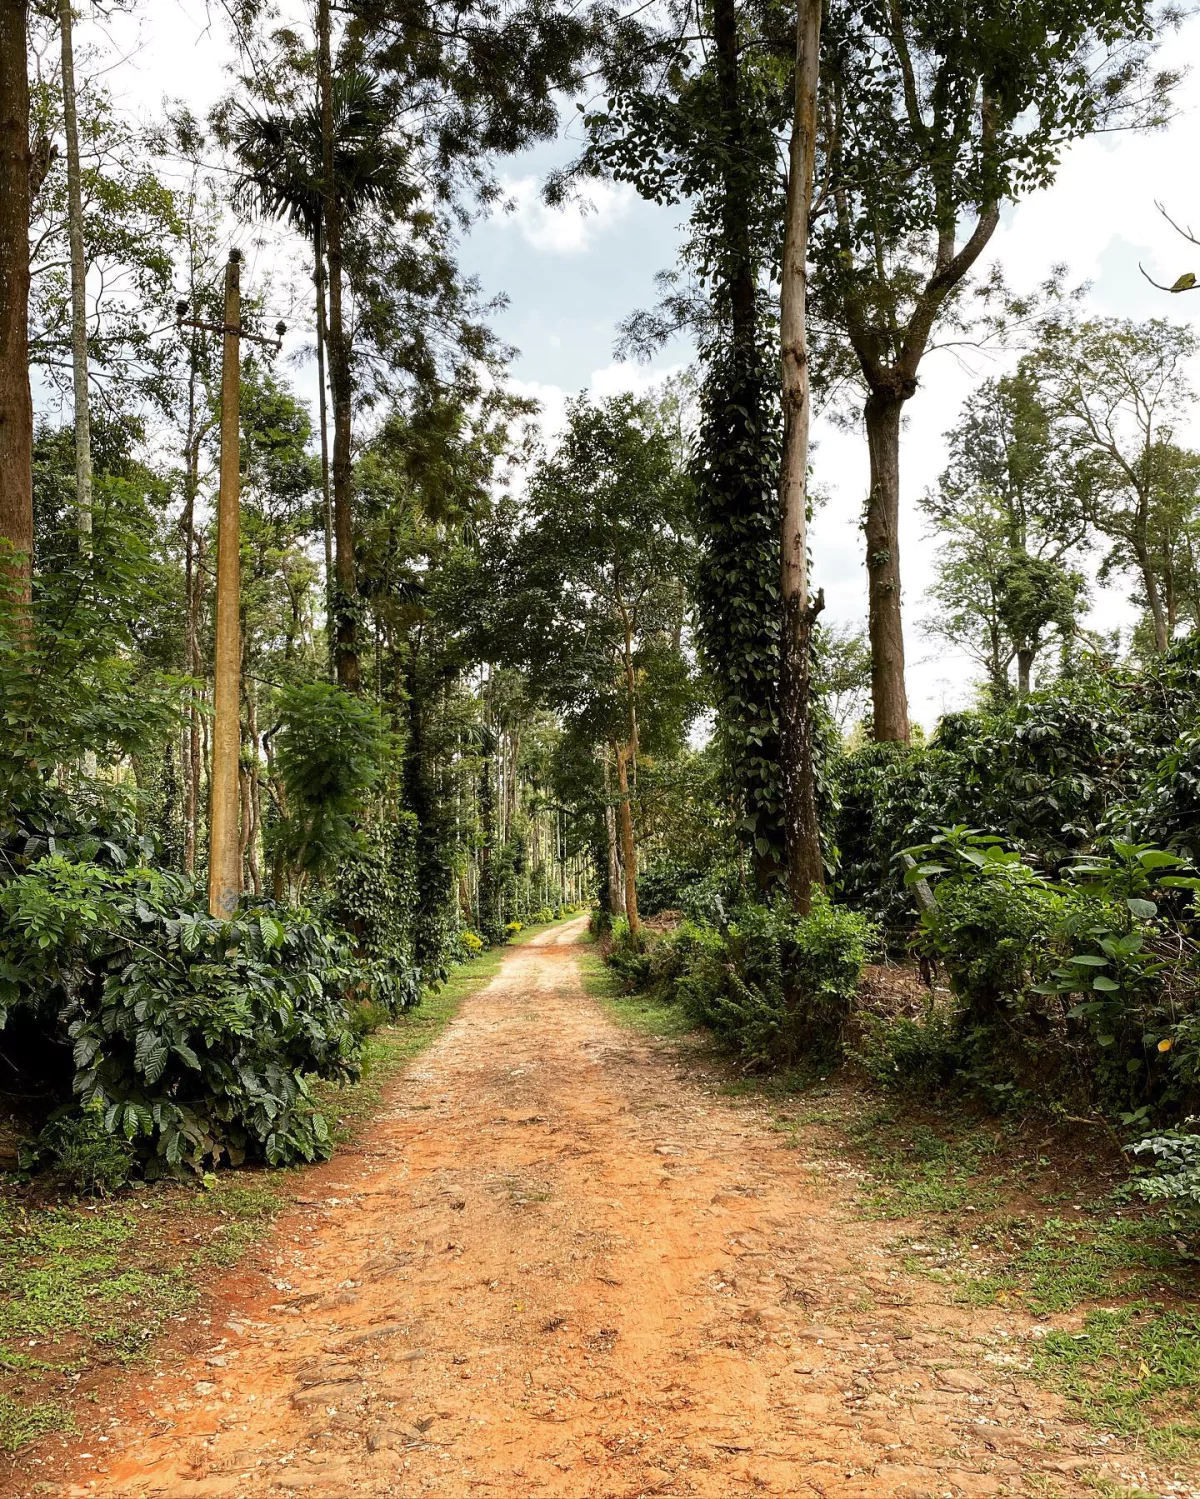 Coorg: The Quintessential Hill Station of Southern India's Western Ghats